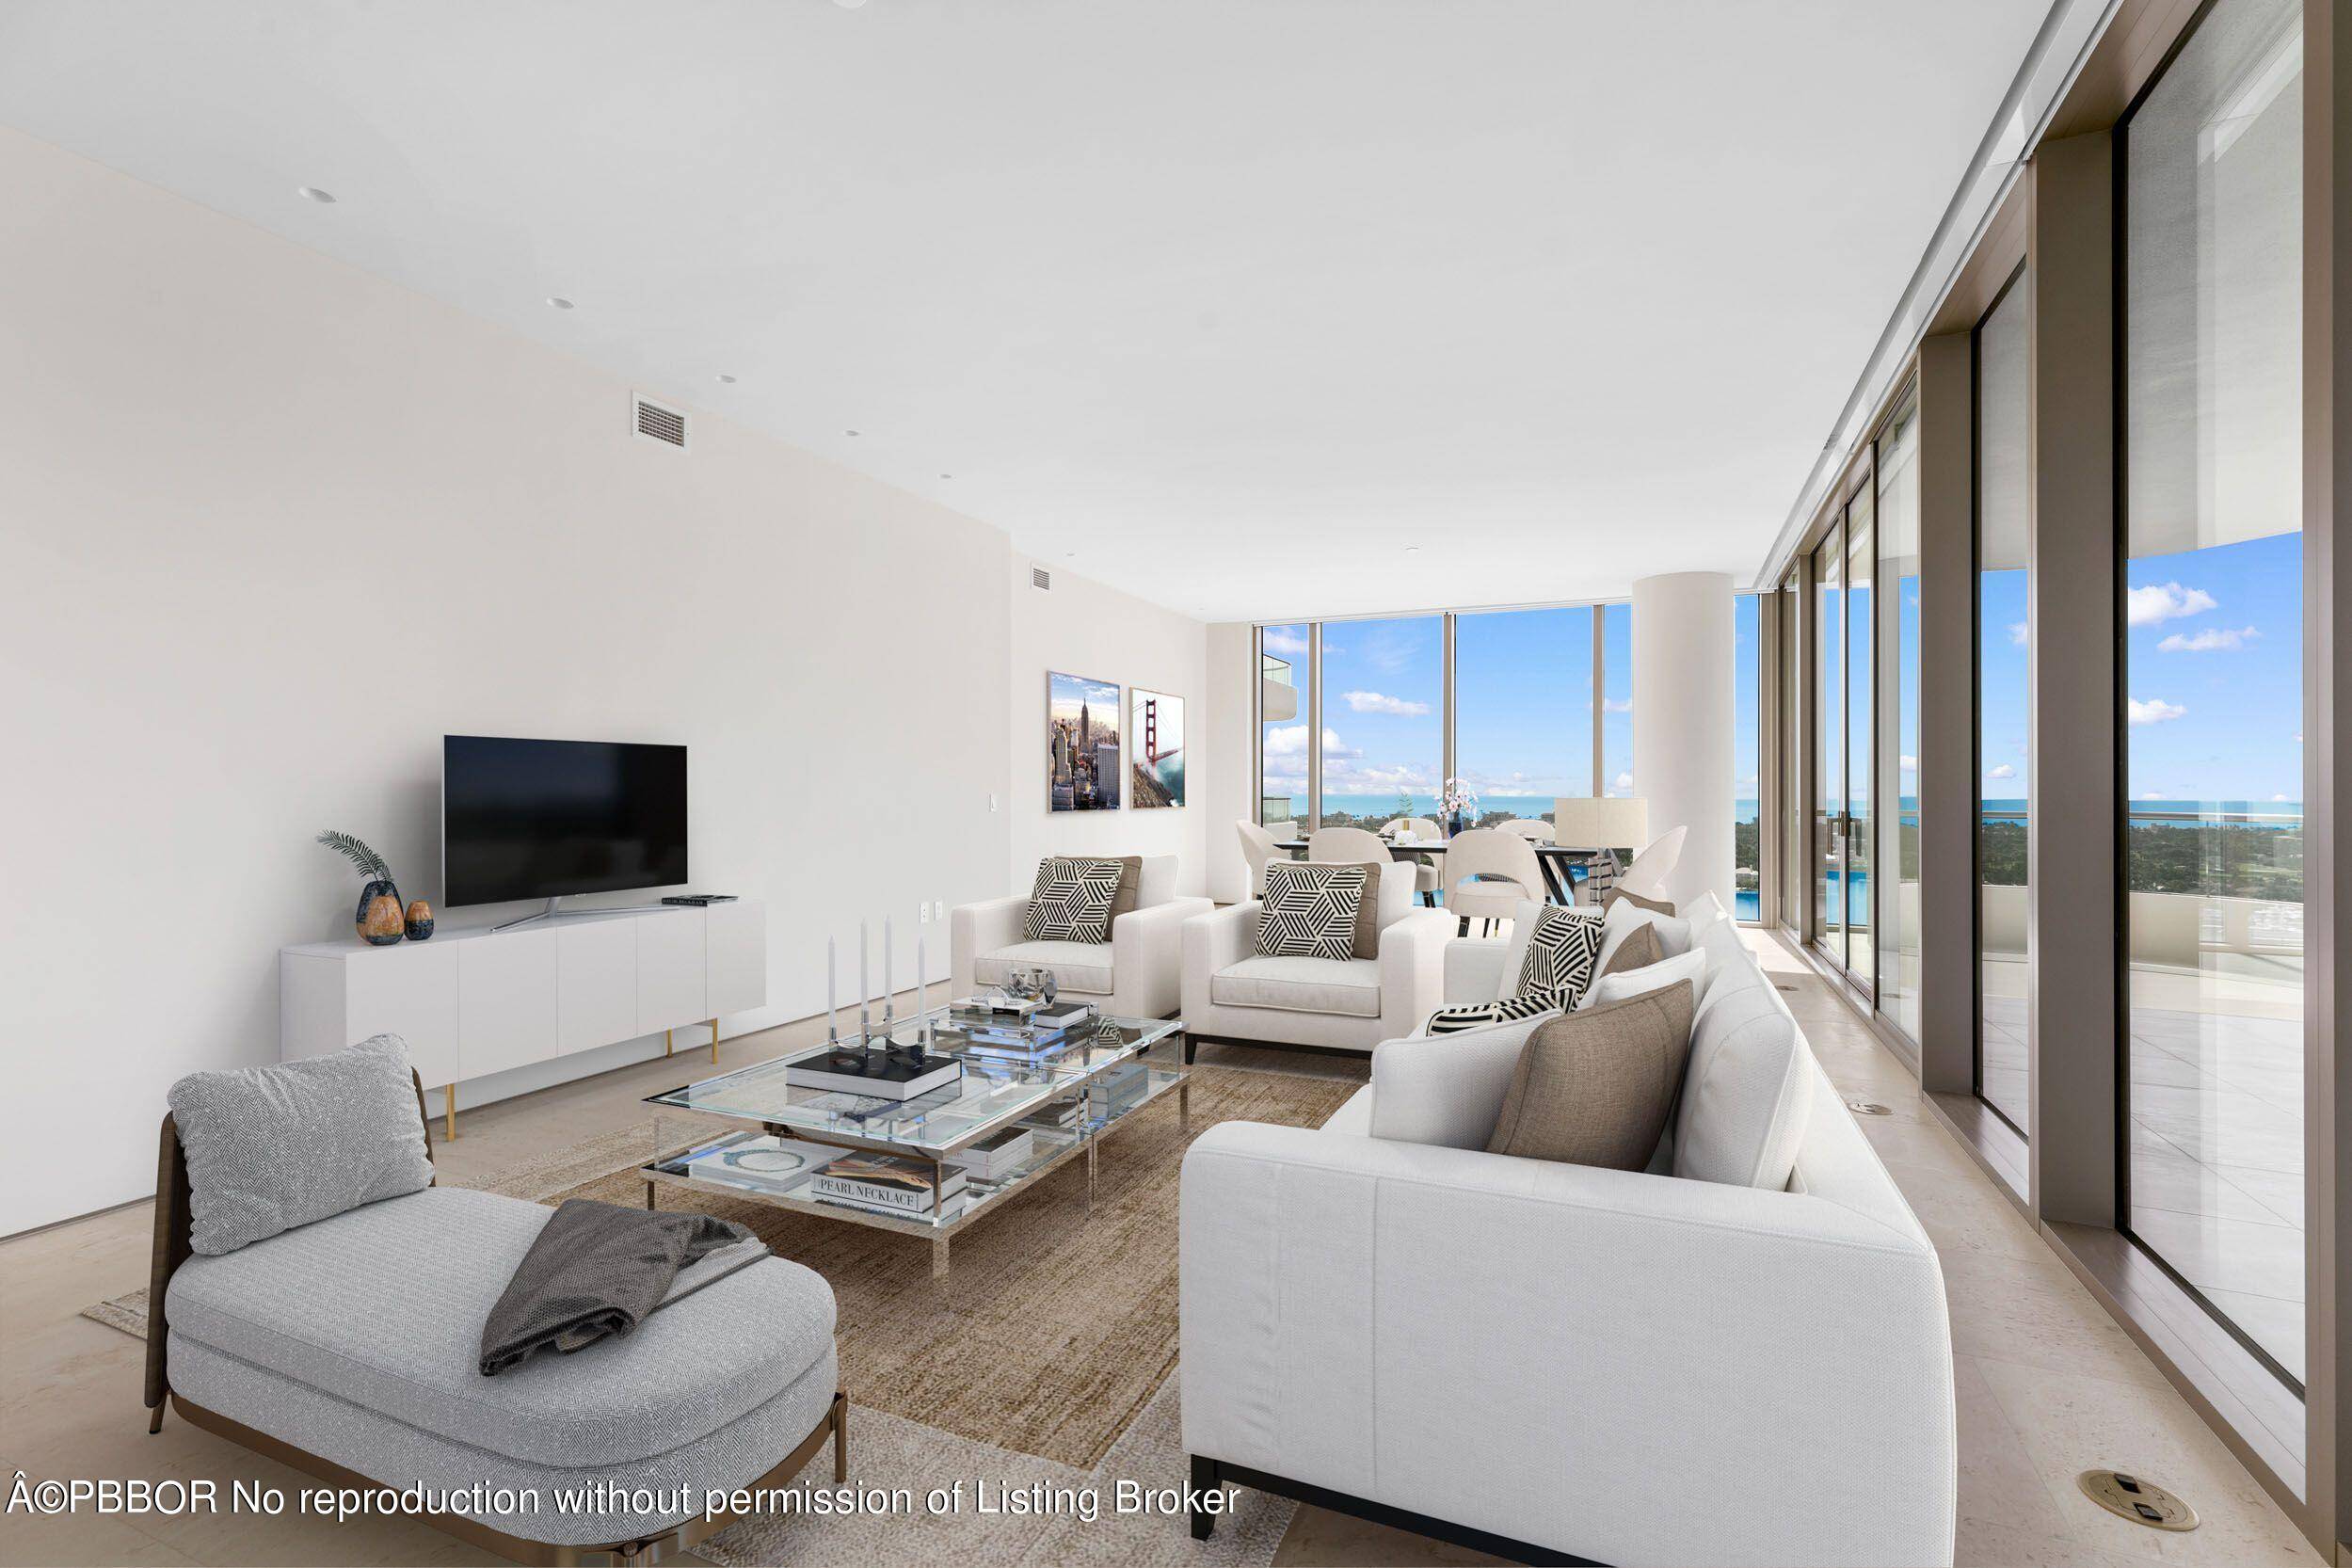 Step into this beautiful 2, 577 sqft, two bedroom unit with sweeping views of the Intracoastal, Palm Beach Island and the ocean.